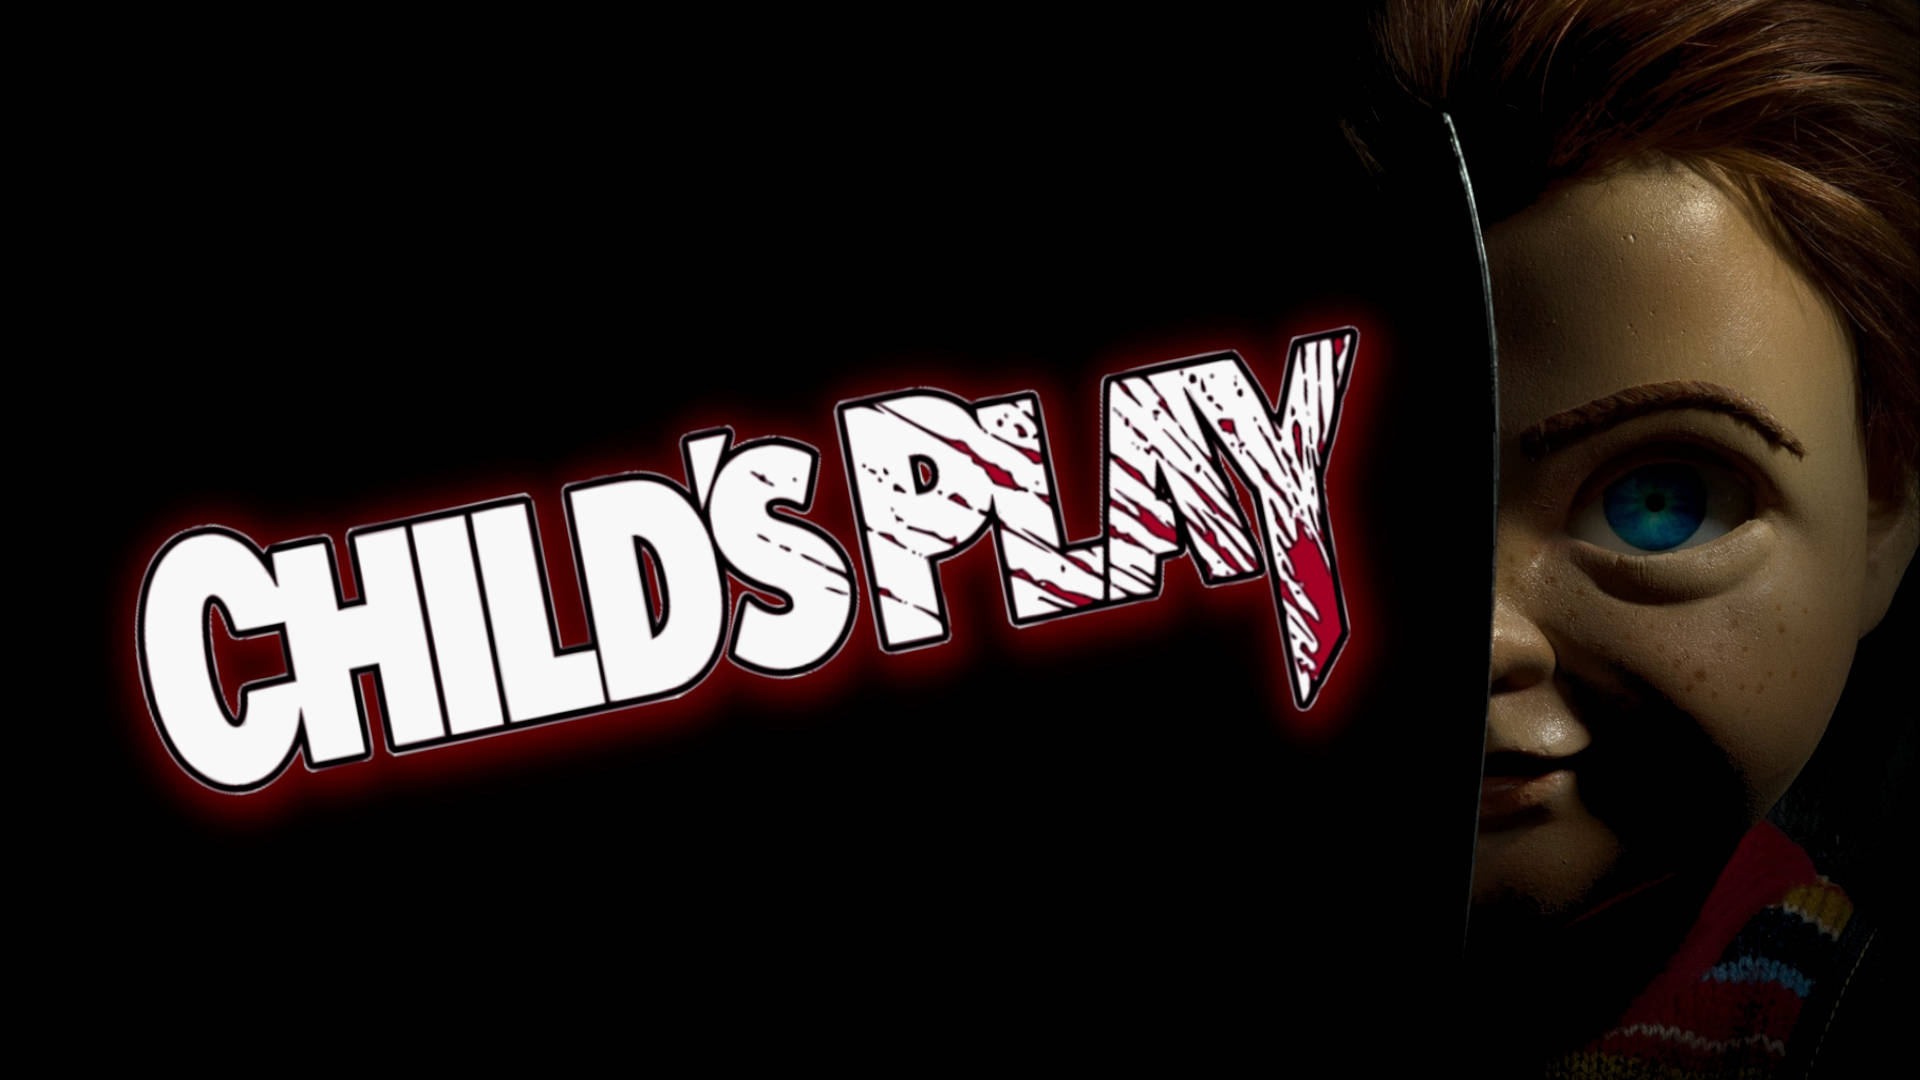 Free Child's Play Wallpaper Downloads, [100+] Child's Play Wallpapers for  FREE 